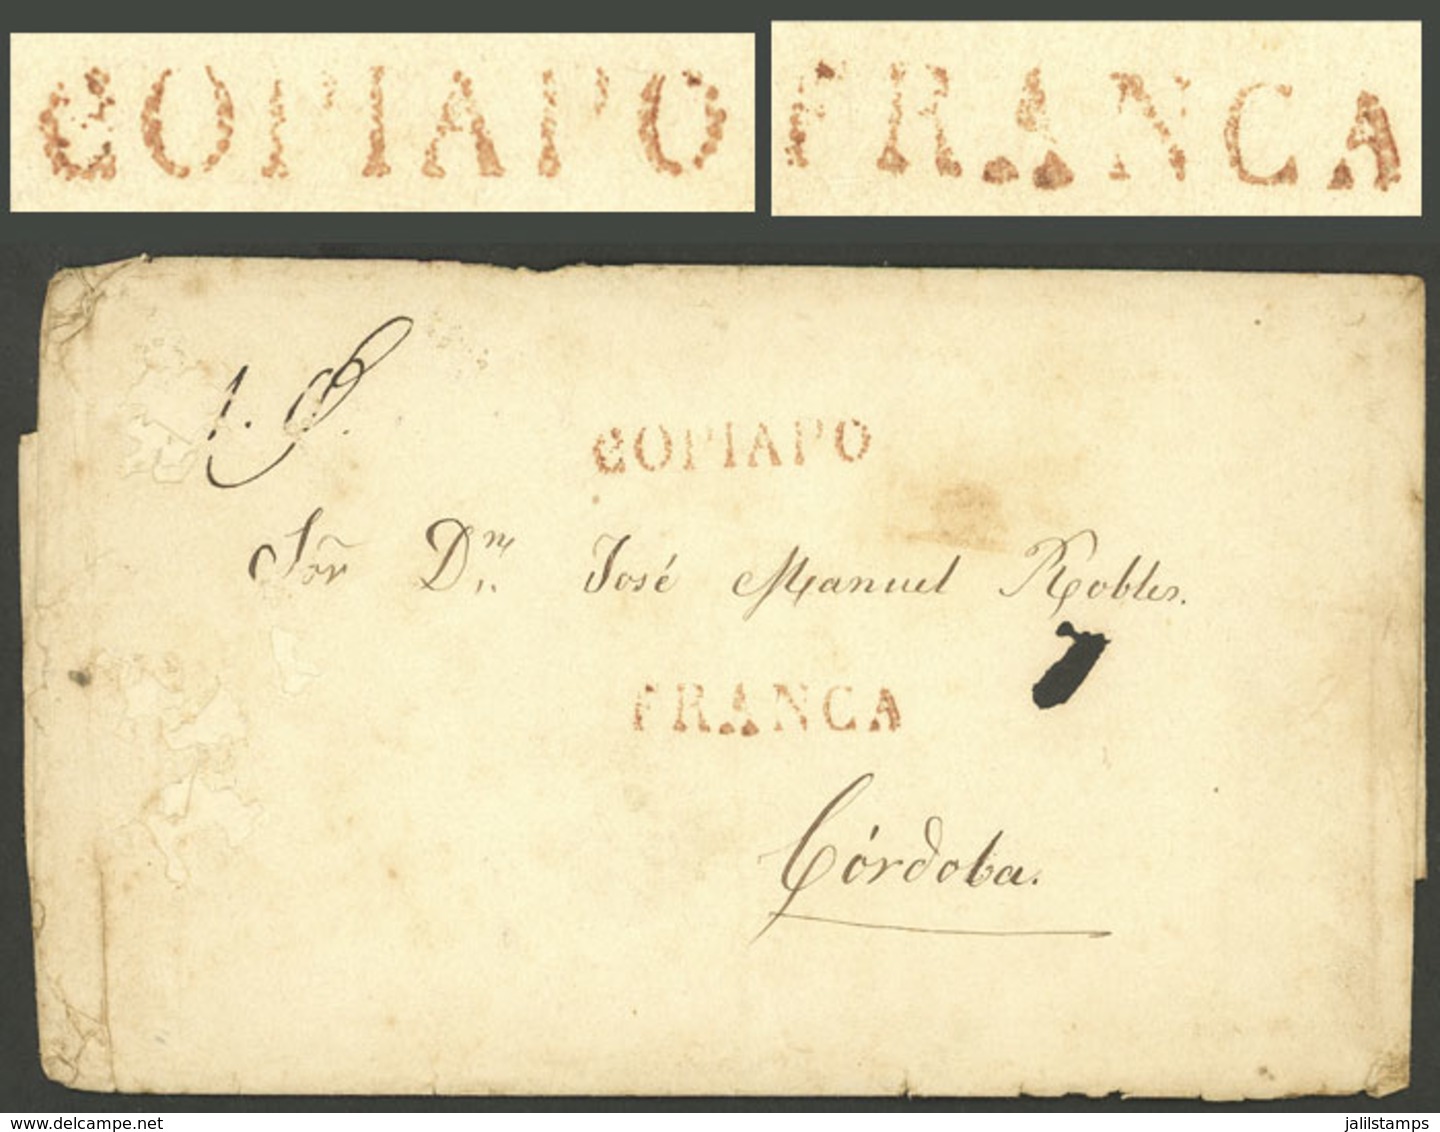 CHILE: Circa 1825, Folded Cover Sent To Córdoba (Argentina) With Red Marks "COPIAPO" And "FRANCA" Very Well Applied, Wit - Chile